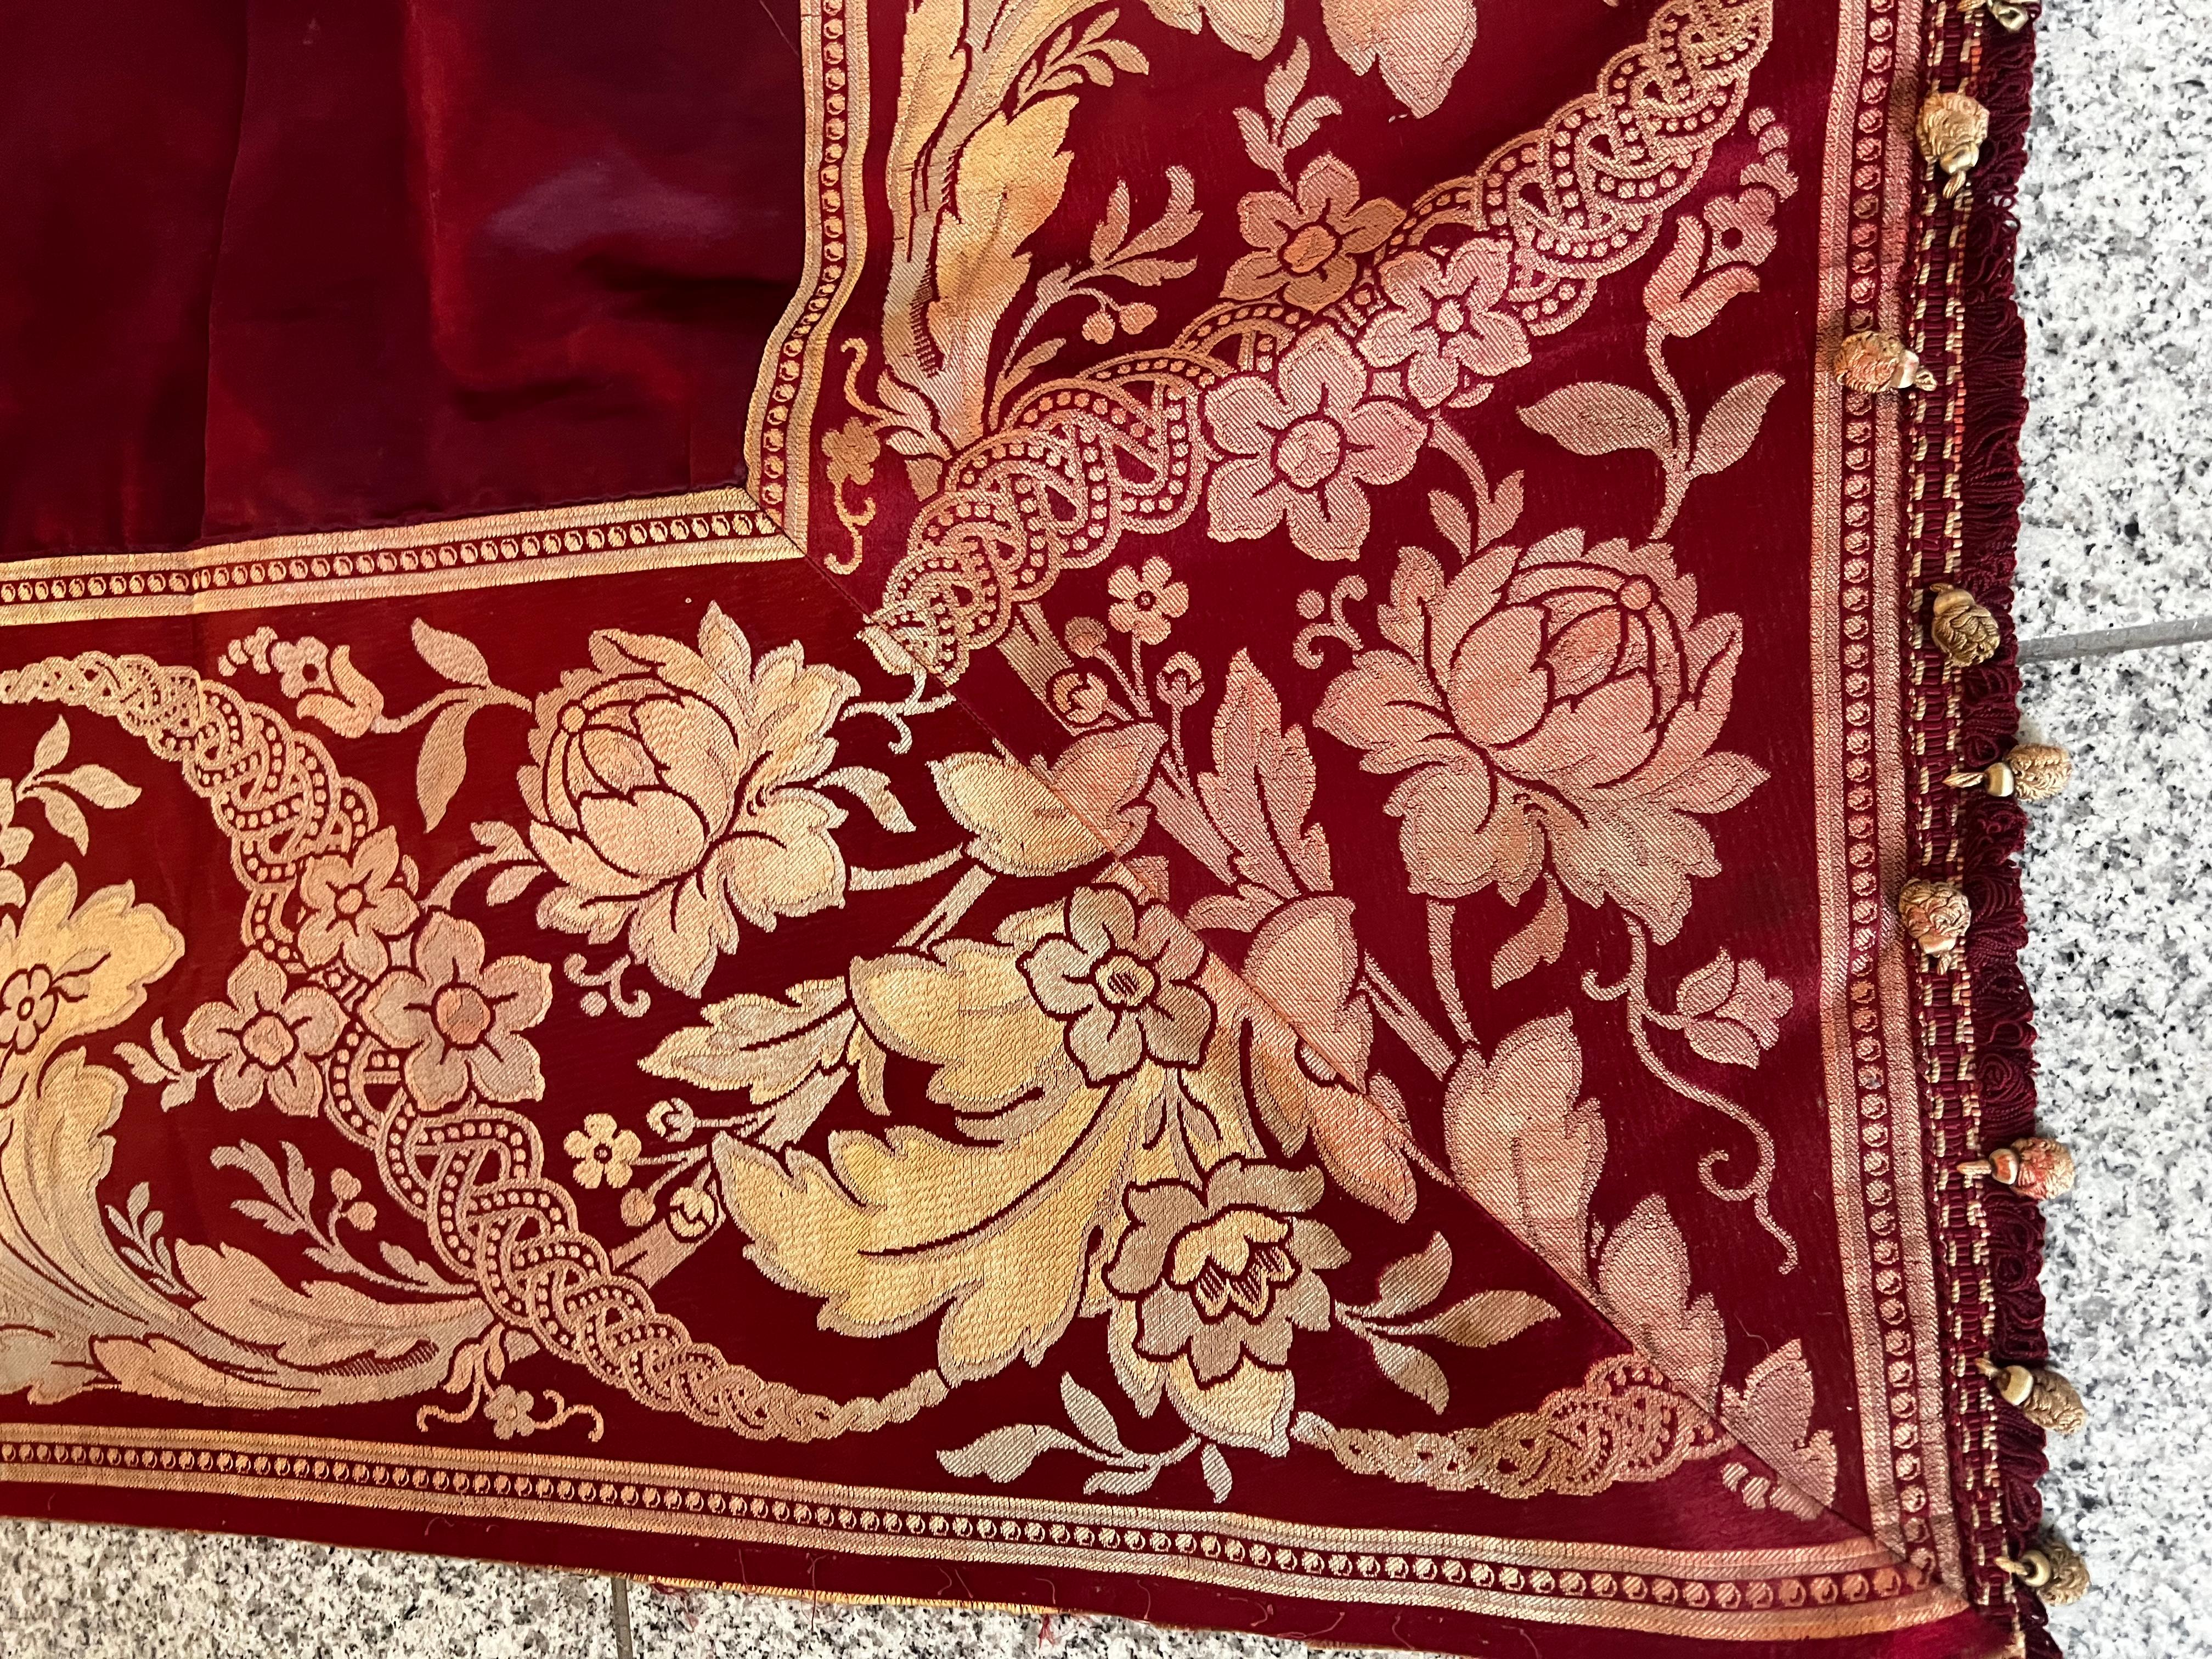 This is an absolutely exquisite, fine and rare 100% silk Venetian material/ fabric. It has a deep red wine very attractive and luxurious general main color, each border has a floral ornamentation and top and bottom has a little tiny tassels which